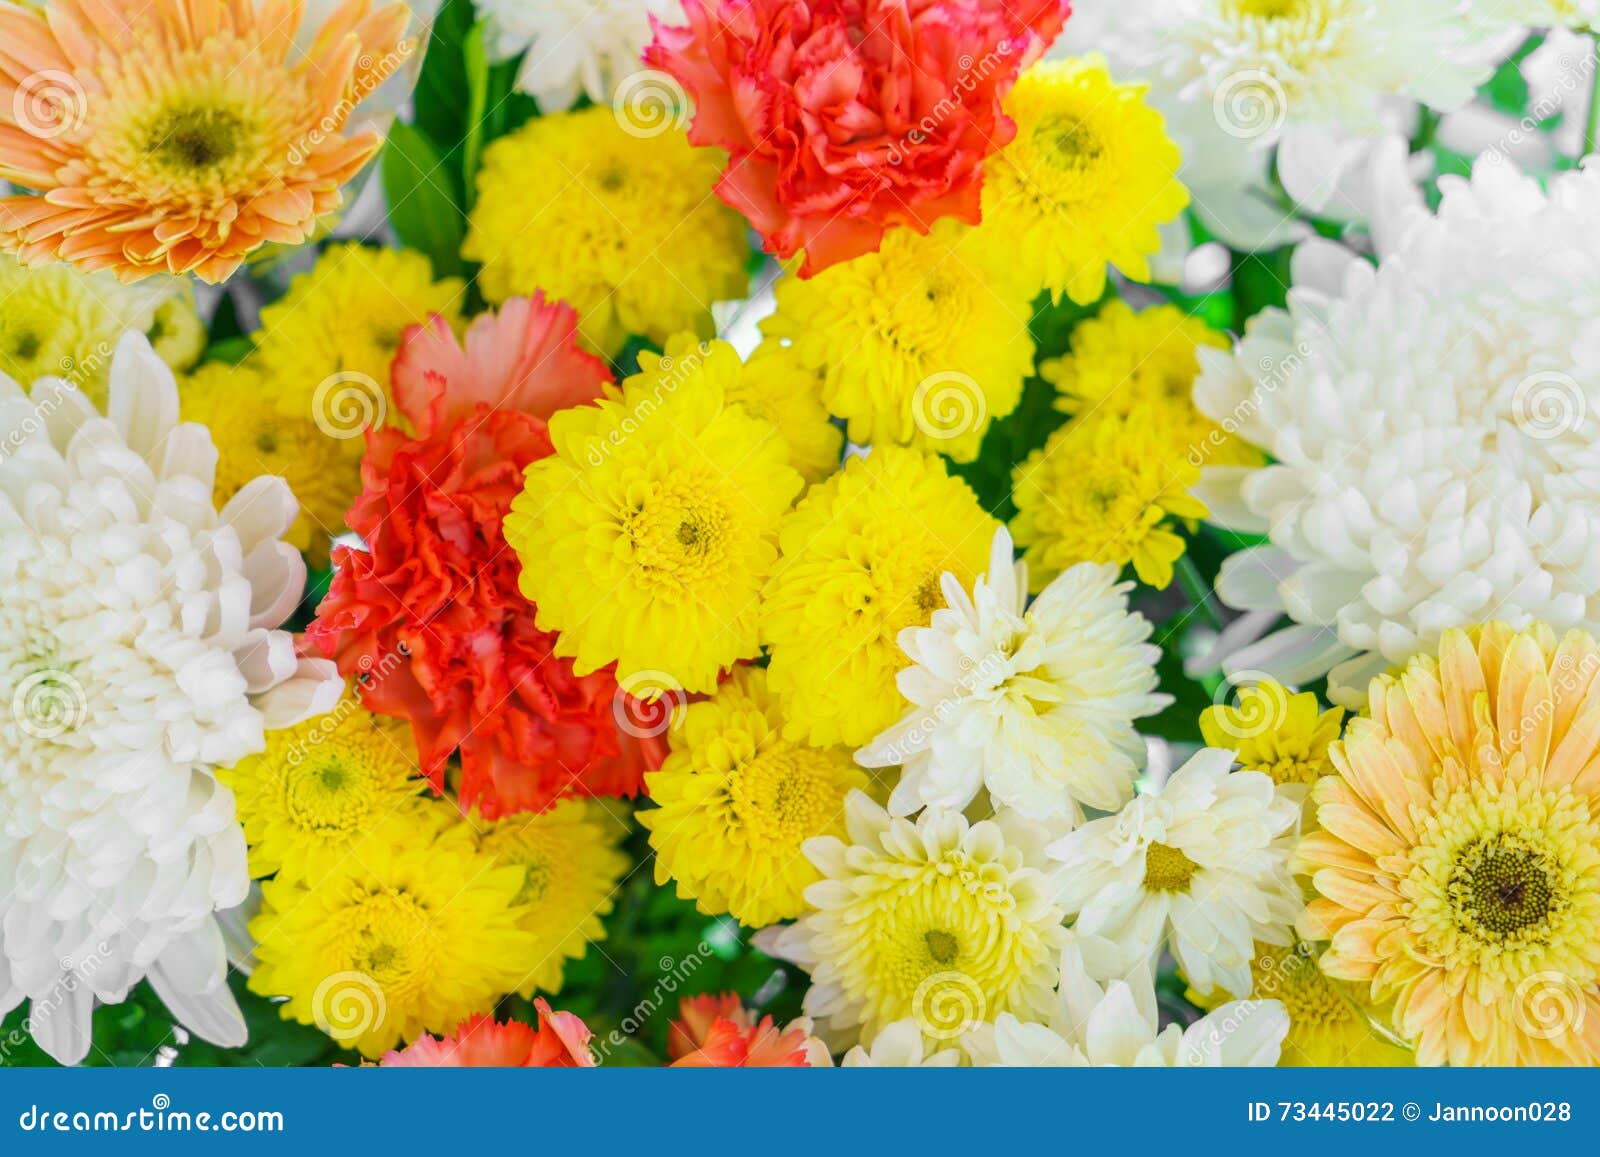 .Beautiful Flowers for Valentines and Wedding Scene Stock Photo - Image ...